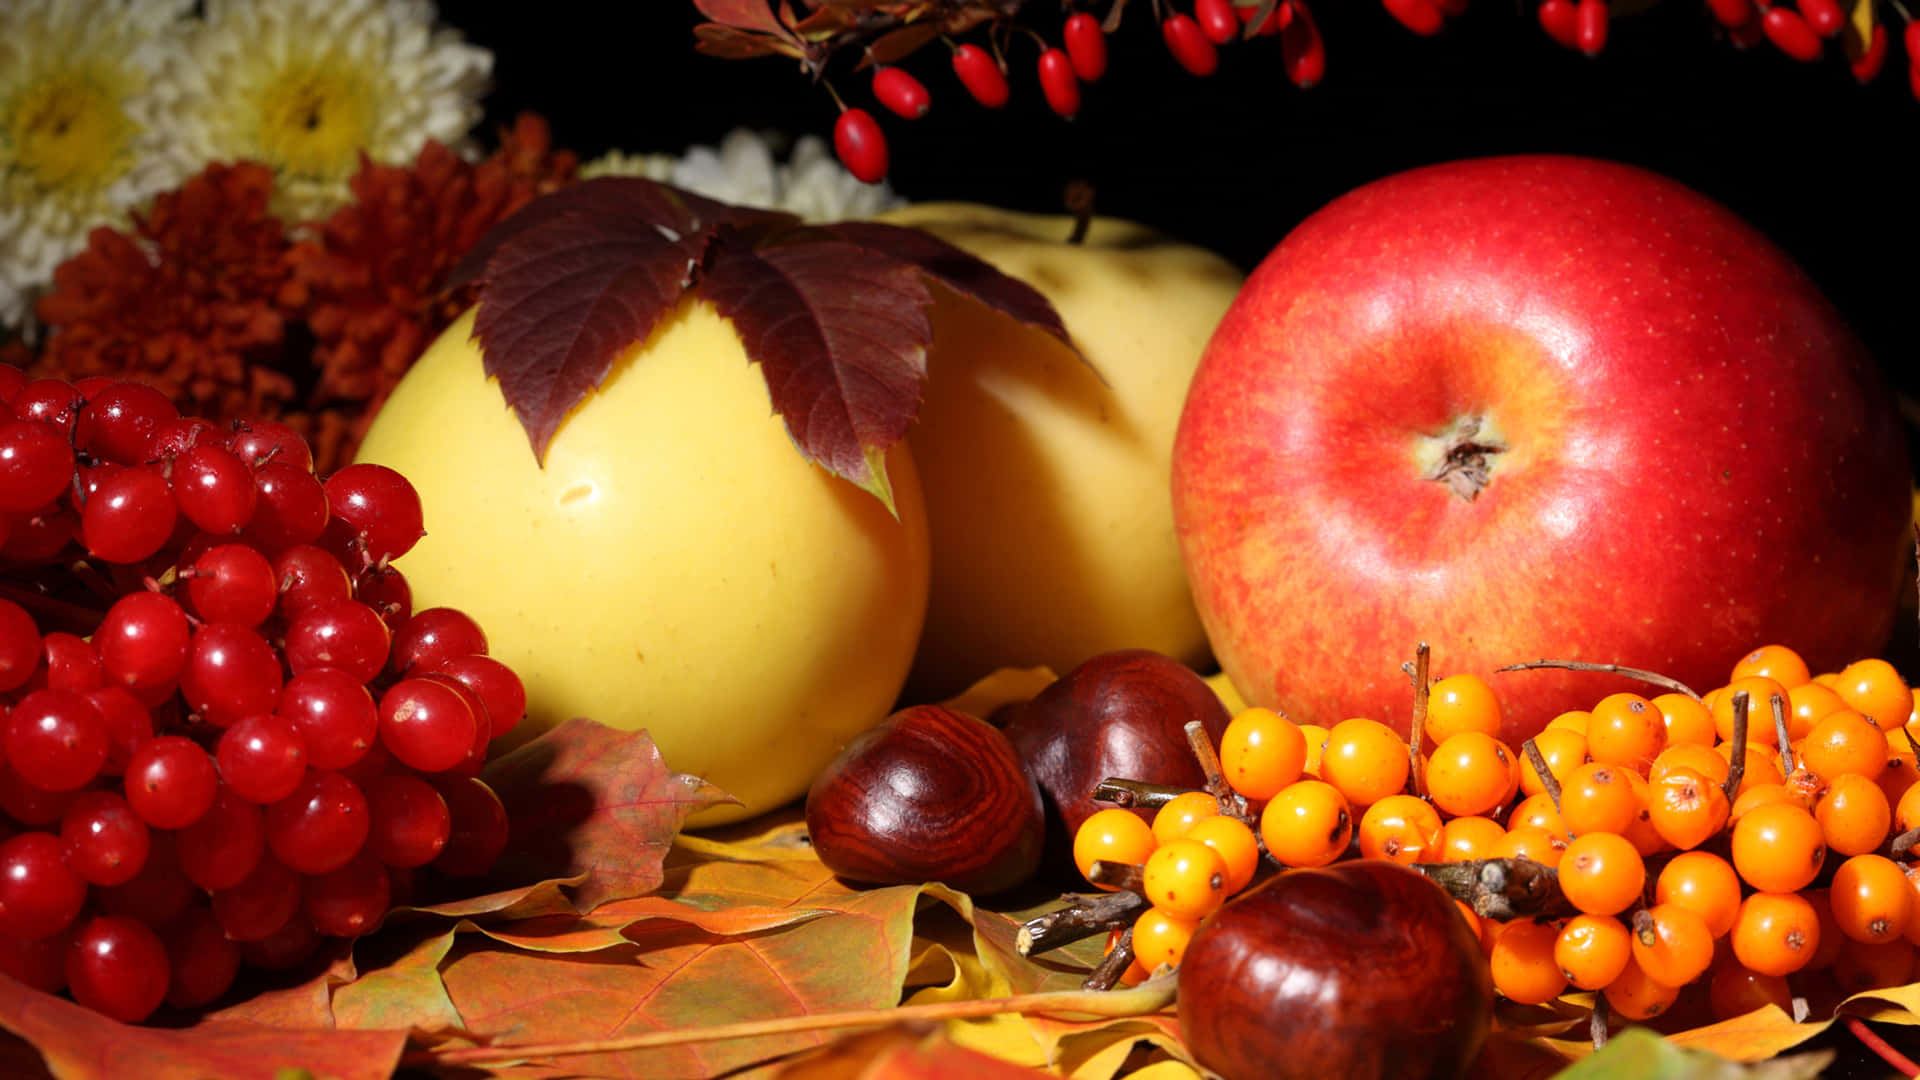 A festive autumn meal displayed on a rustic wooden table Wallpaper